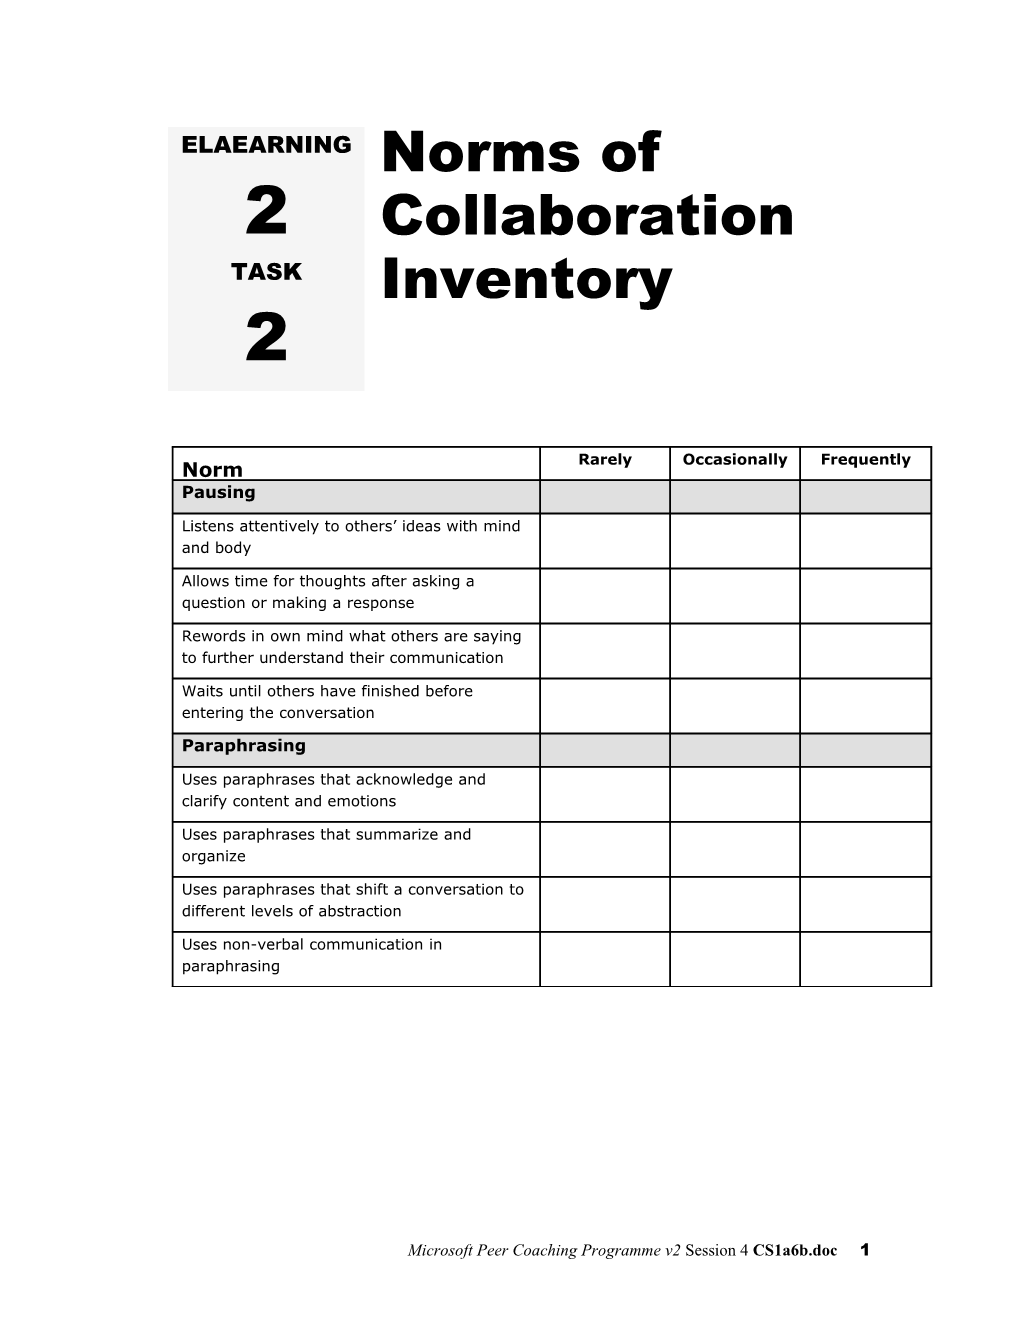 Norms of Collaboration Inventory